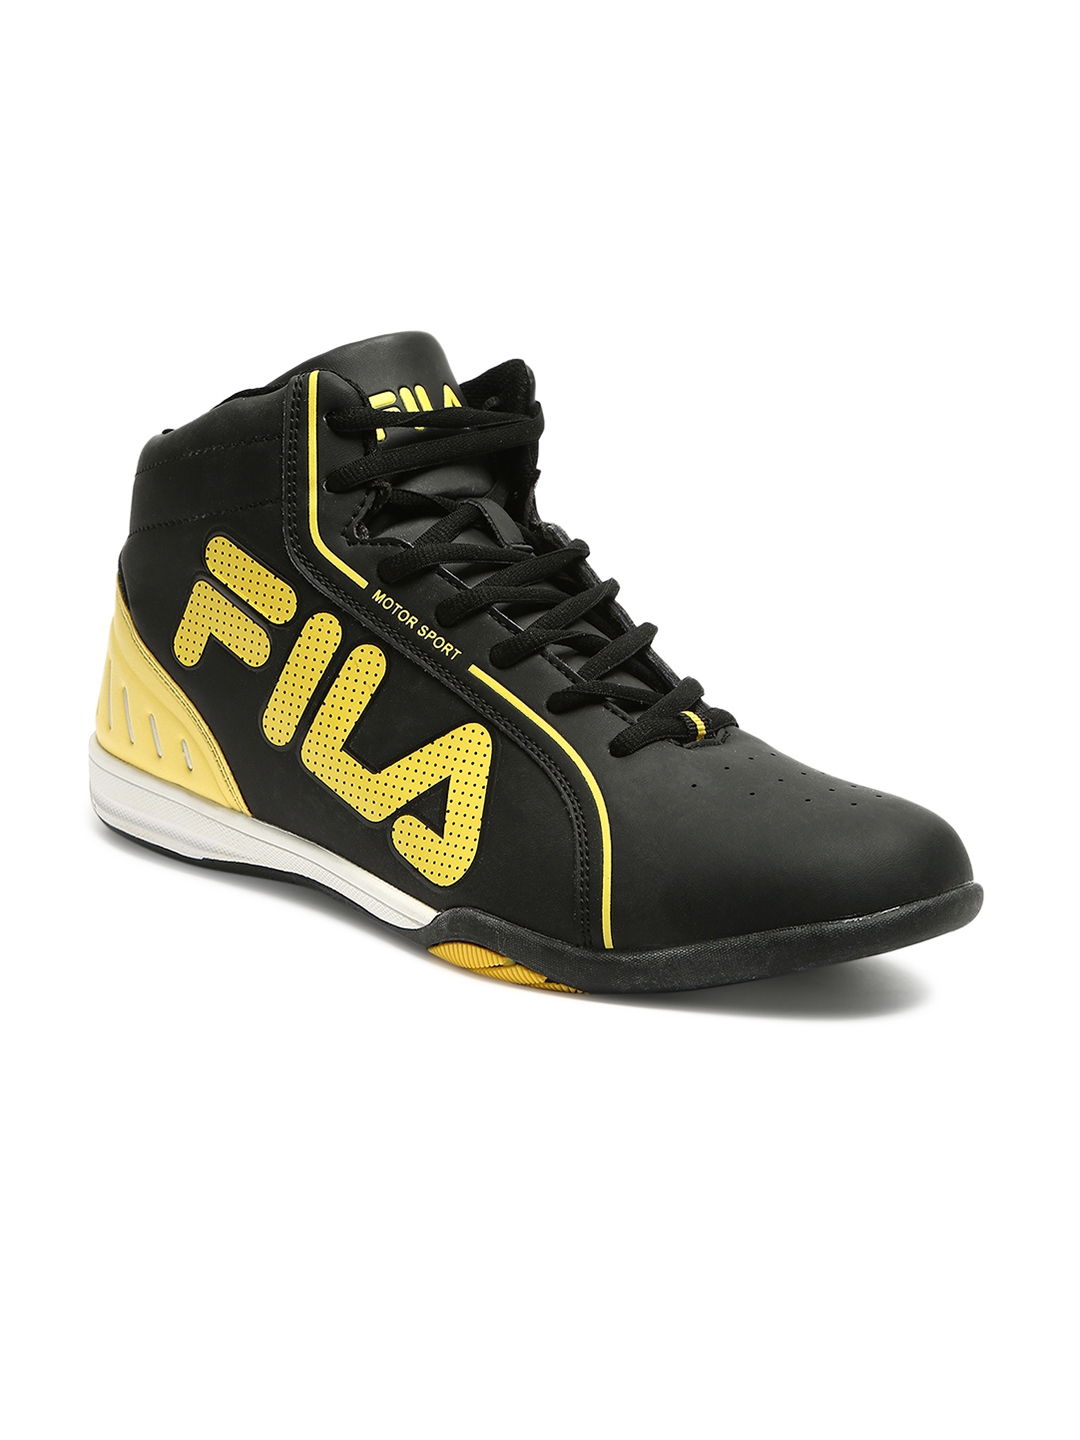 fila shoes black and yellow